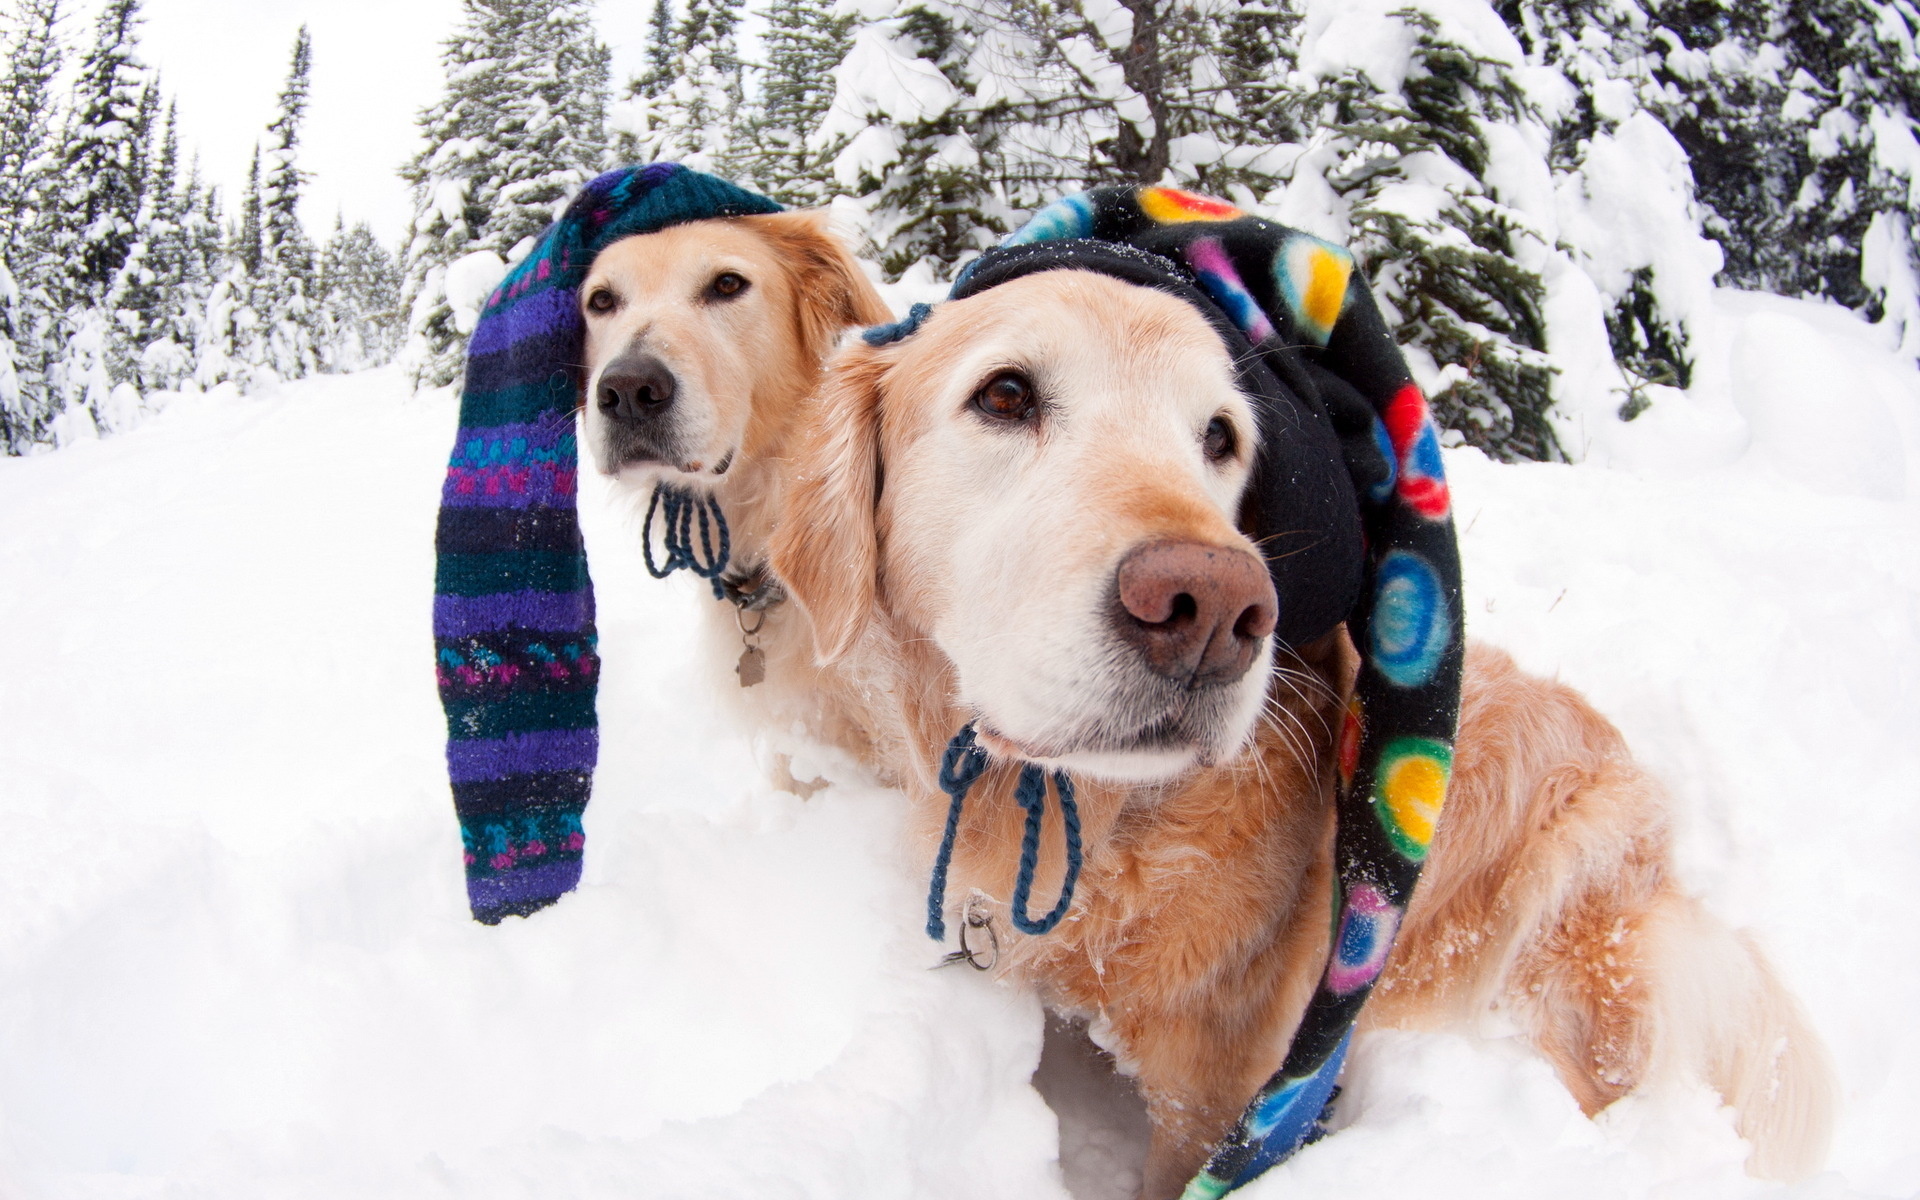 Keeping Your Dog Safe This Winter Season